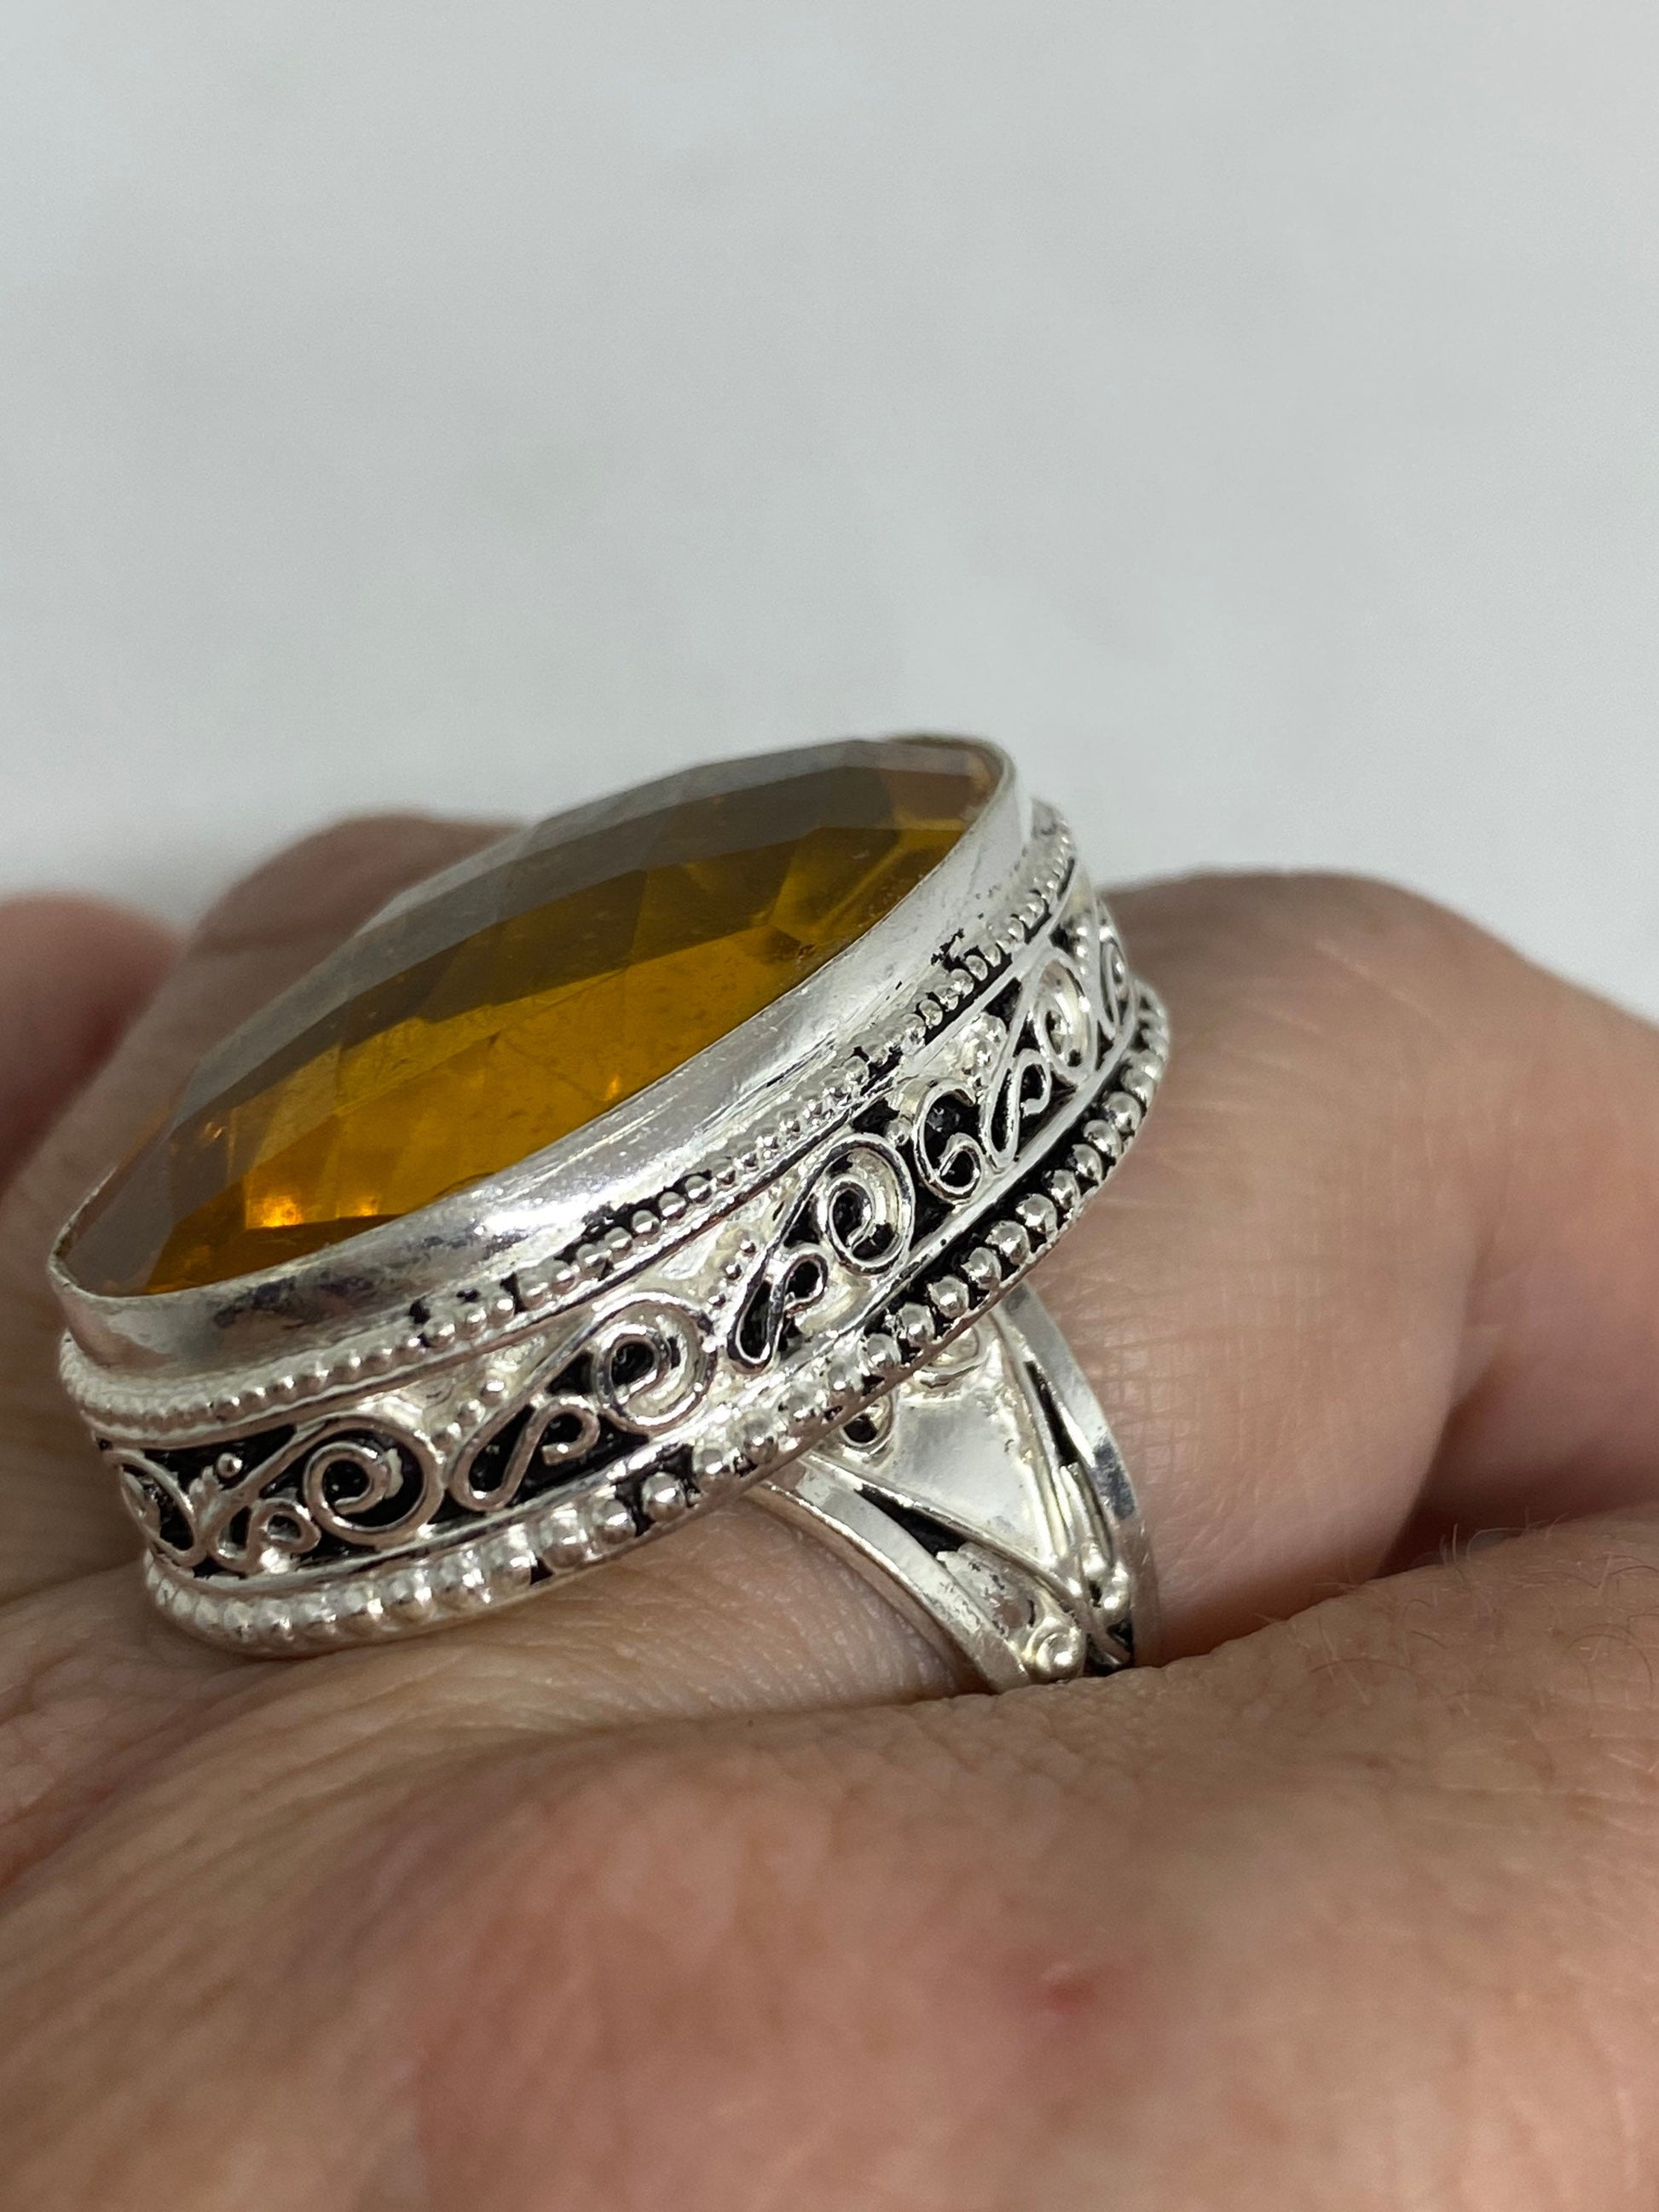 Vintage Yellow Vintage Art Glass Cocktail Ring Size 7.5